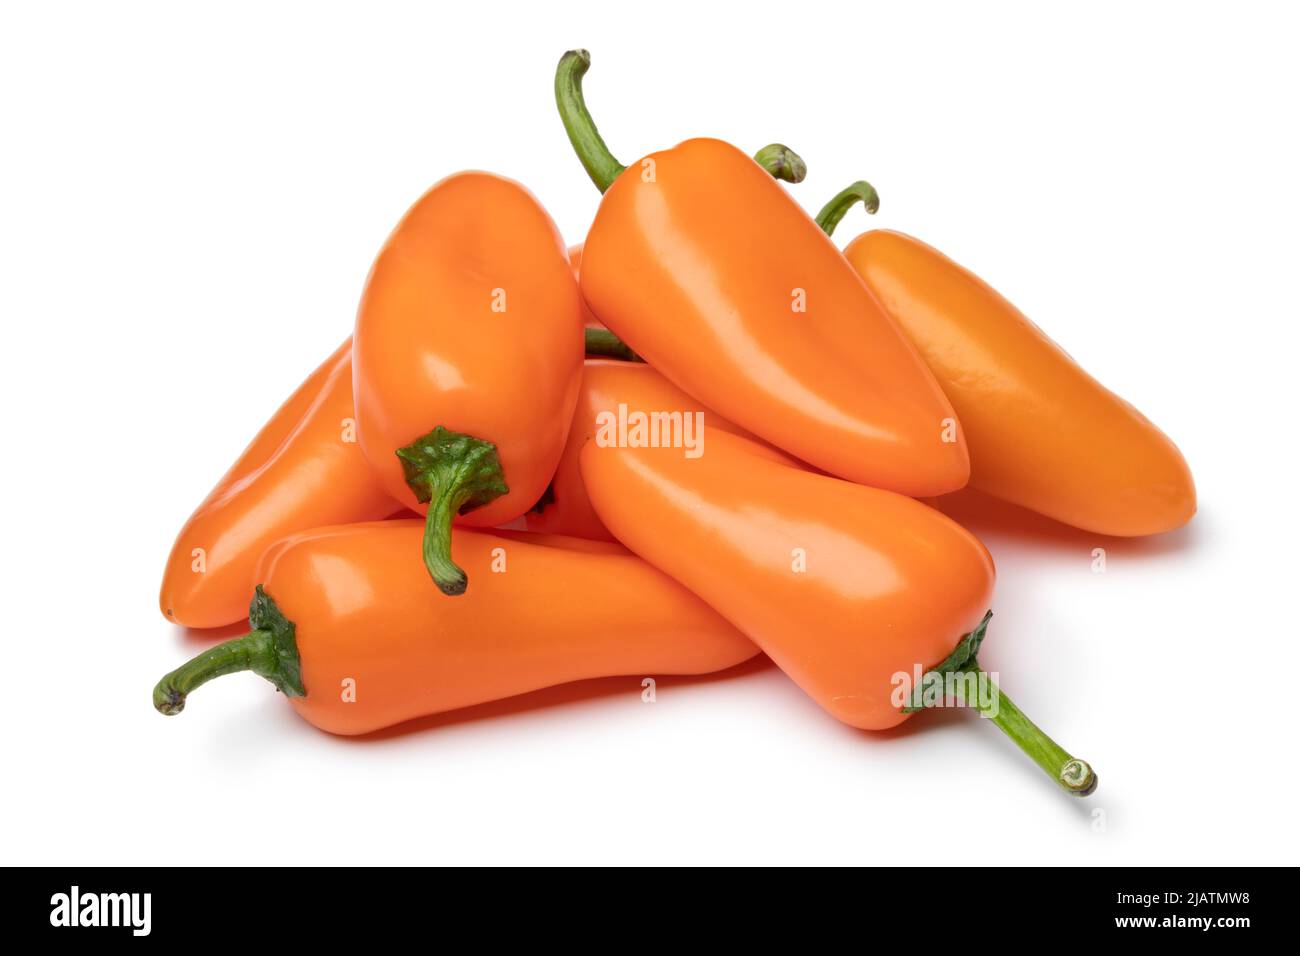 Heap of whole fresh orange mini pointed bell peppers close up isolated on white background Stock Photo